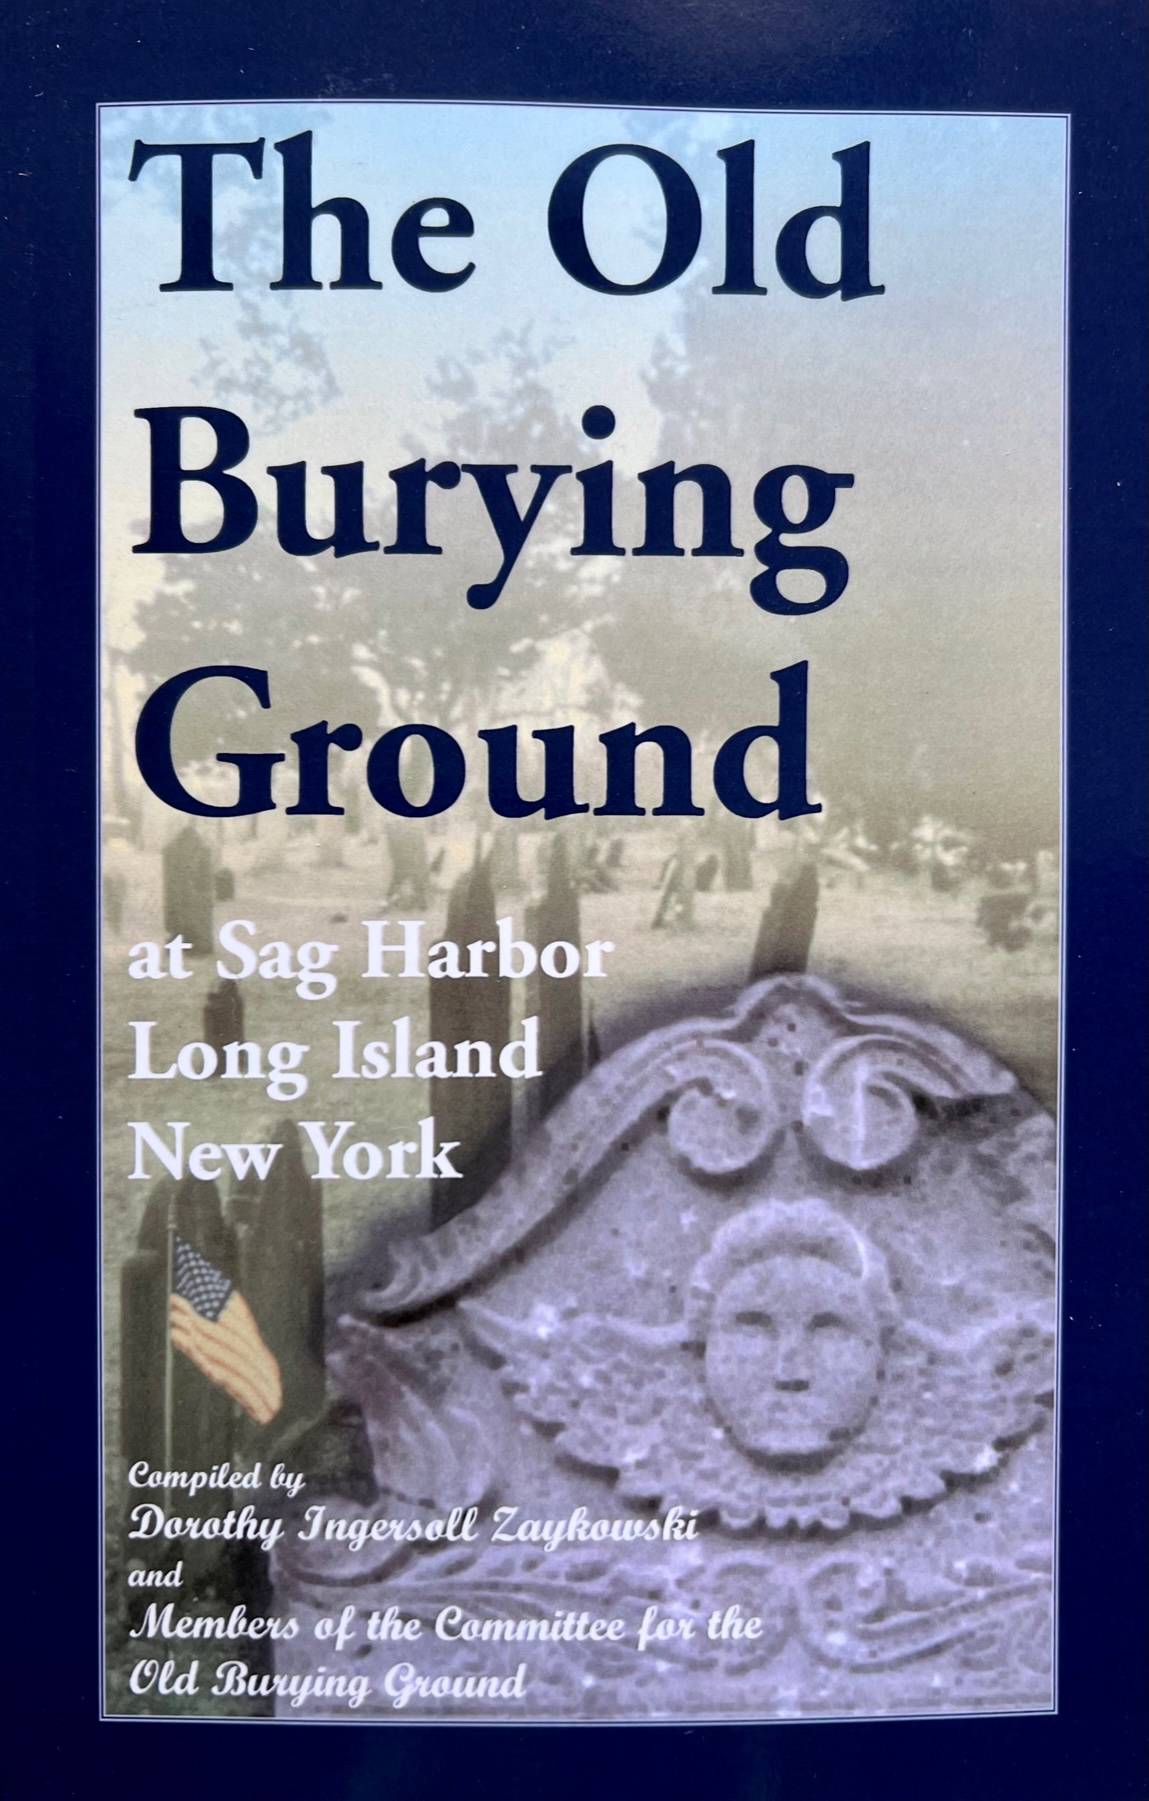 The Old Burying Ground by Dorothy Ingersoll Zaykowski & Members of the Committee for the Old Burying Ground